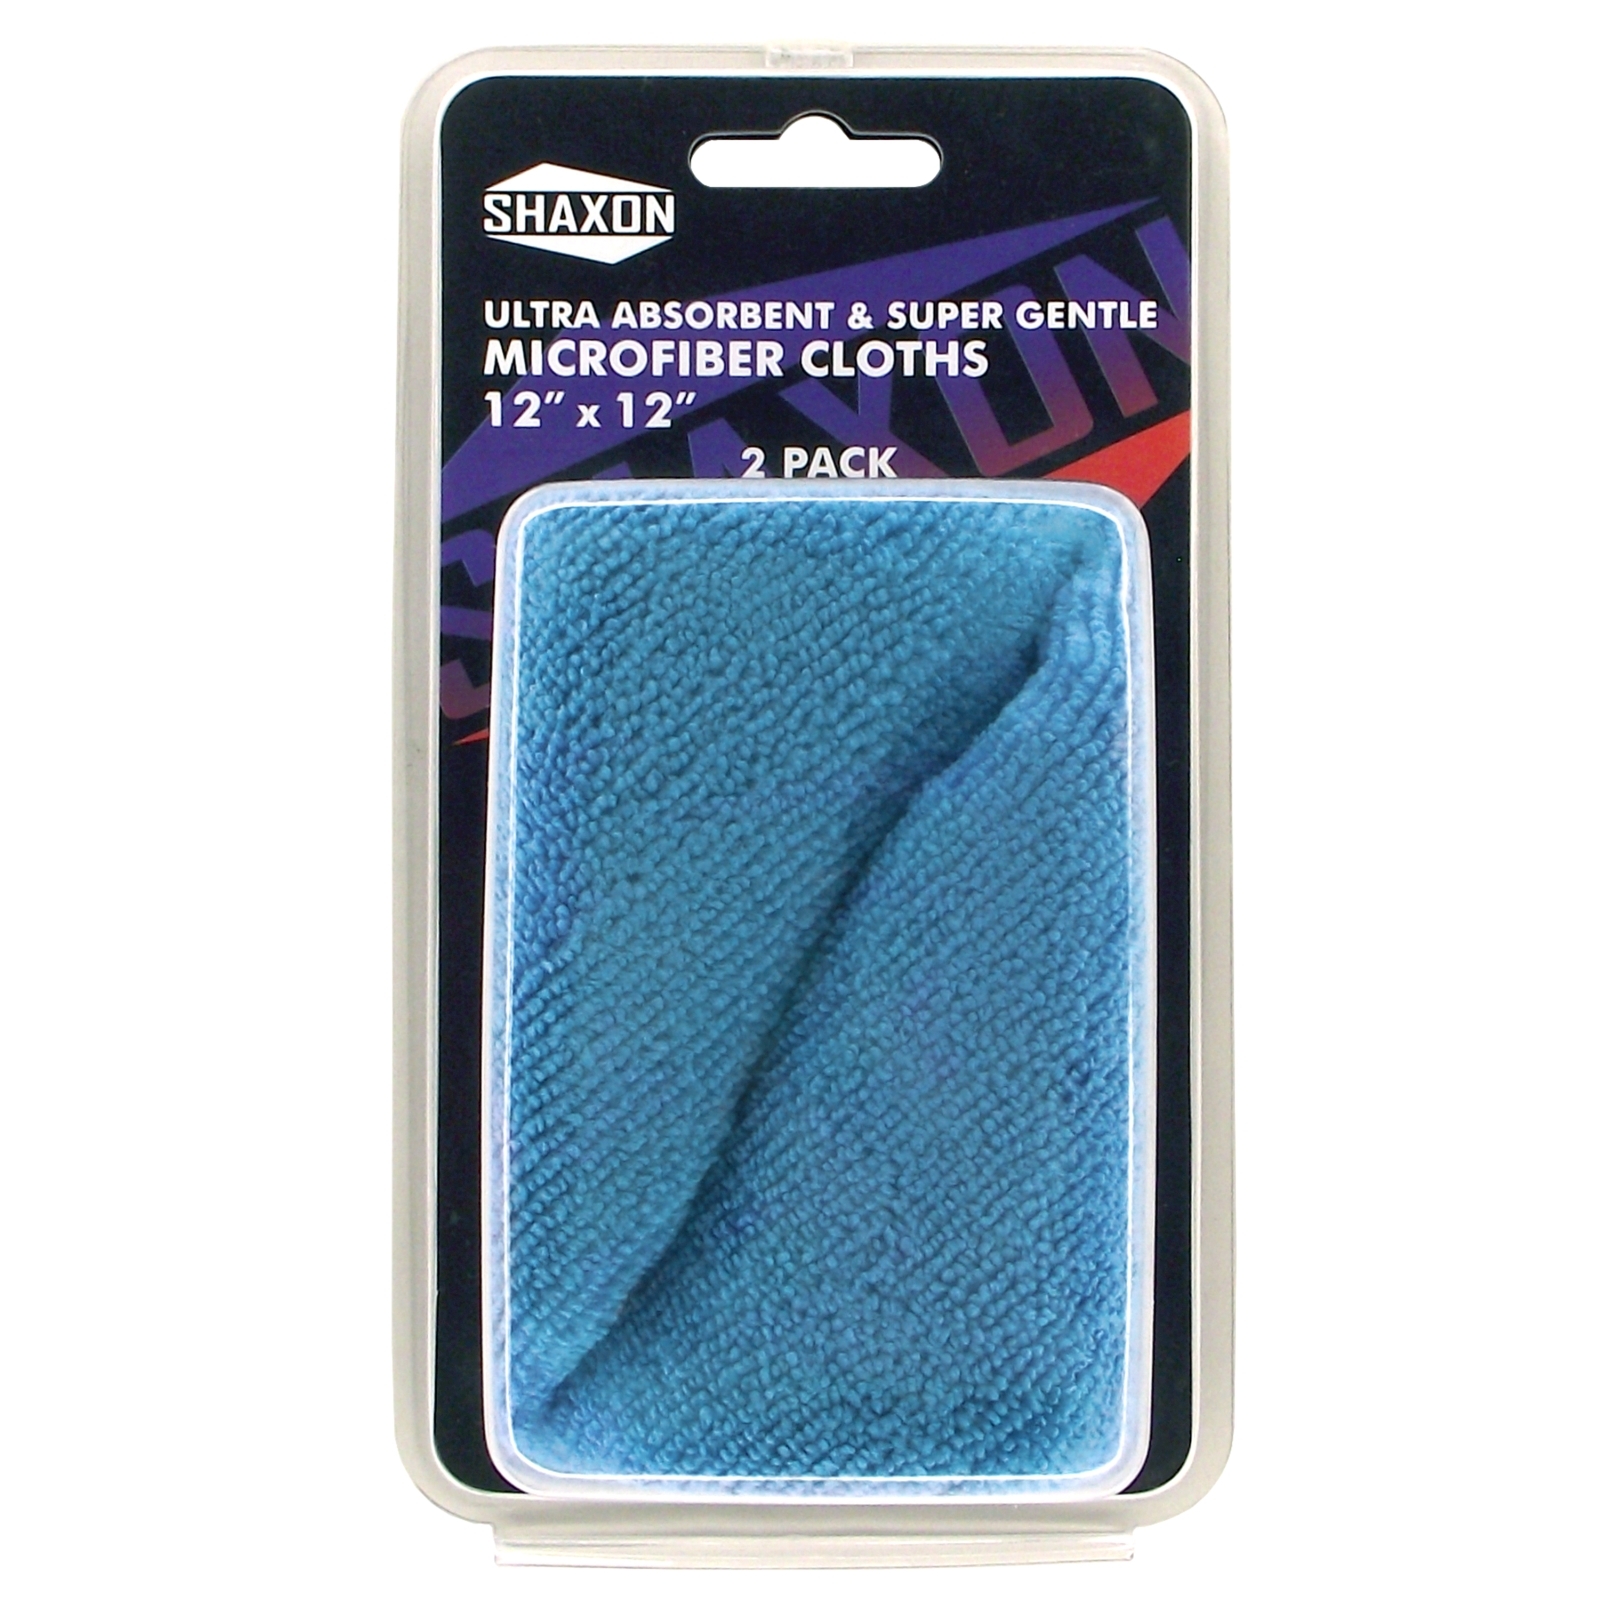 Absorbent Gentle SHX-MFW2-1212-B Shaxon Microfiber Cleaning Cloths 2-pack